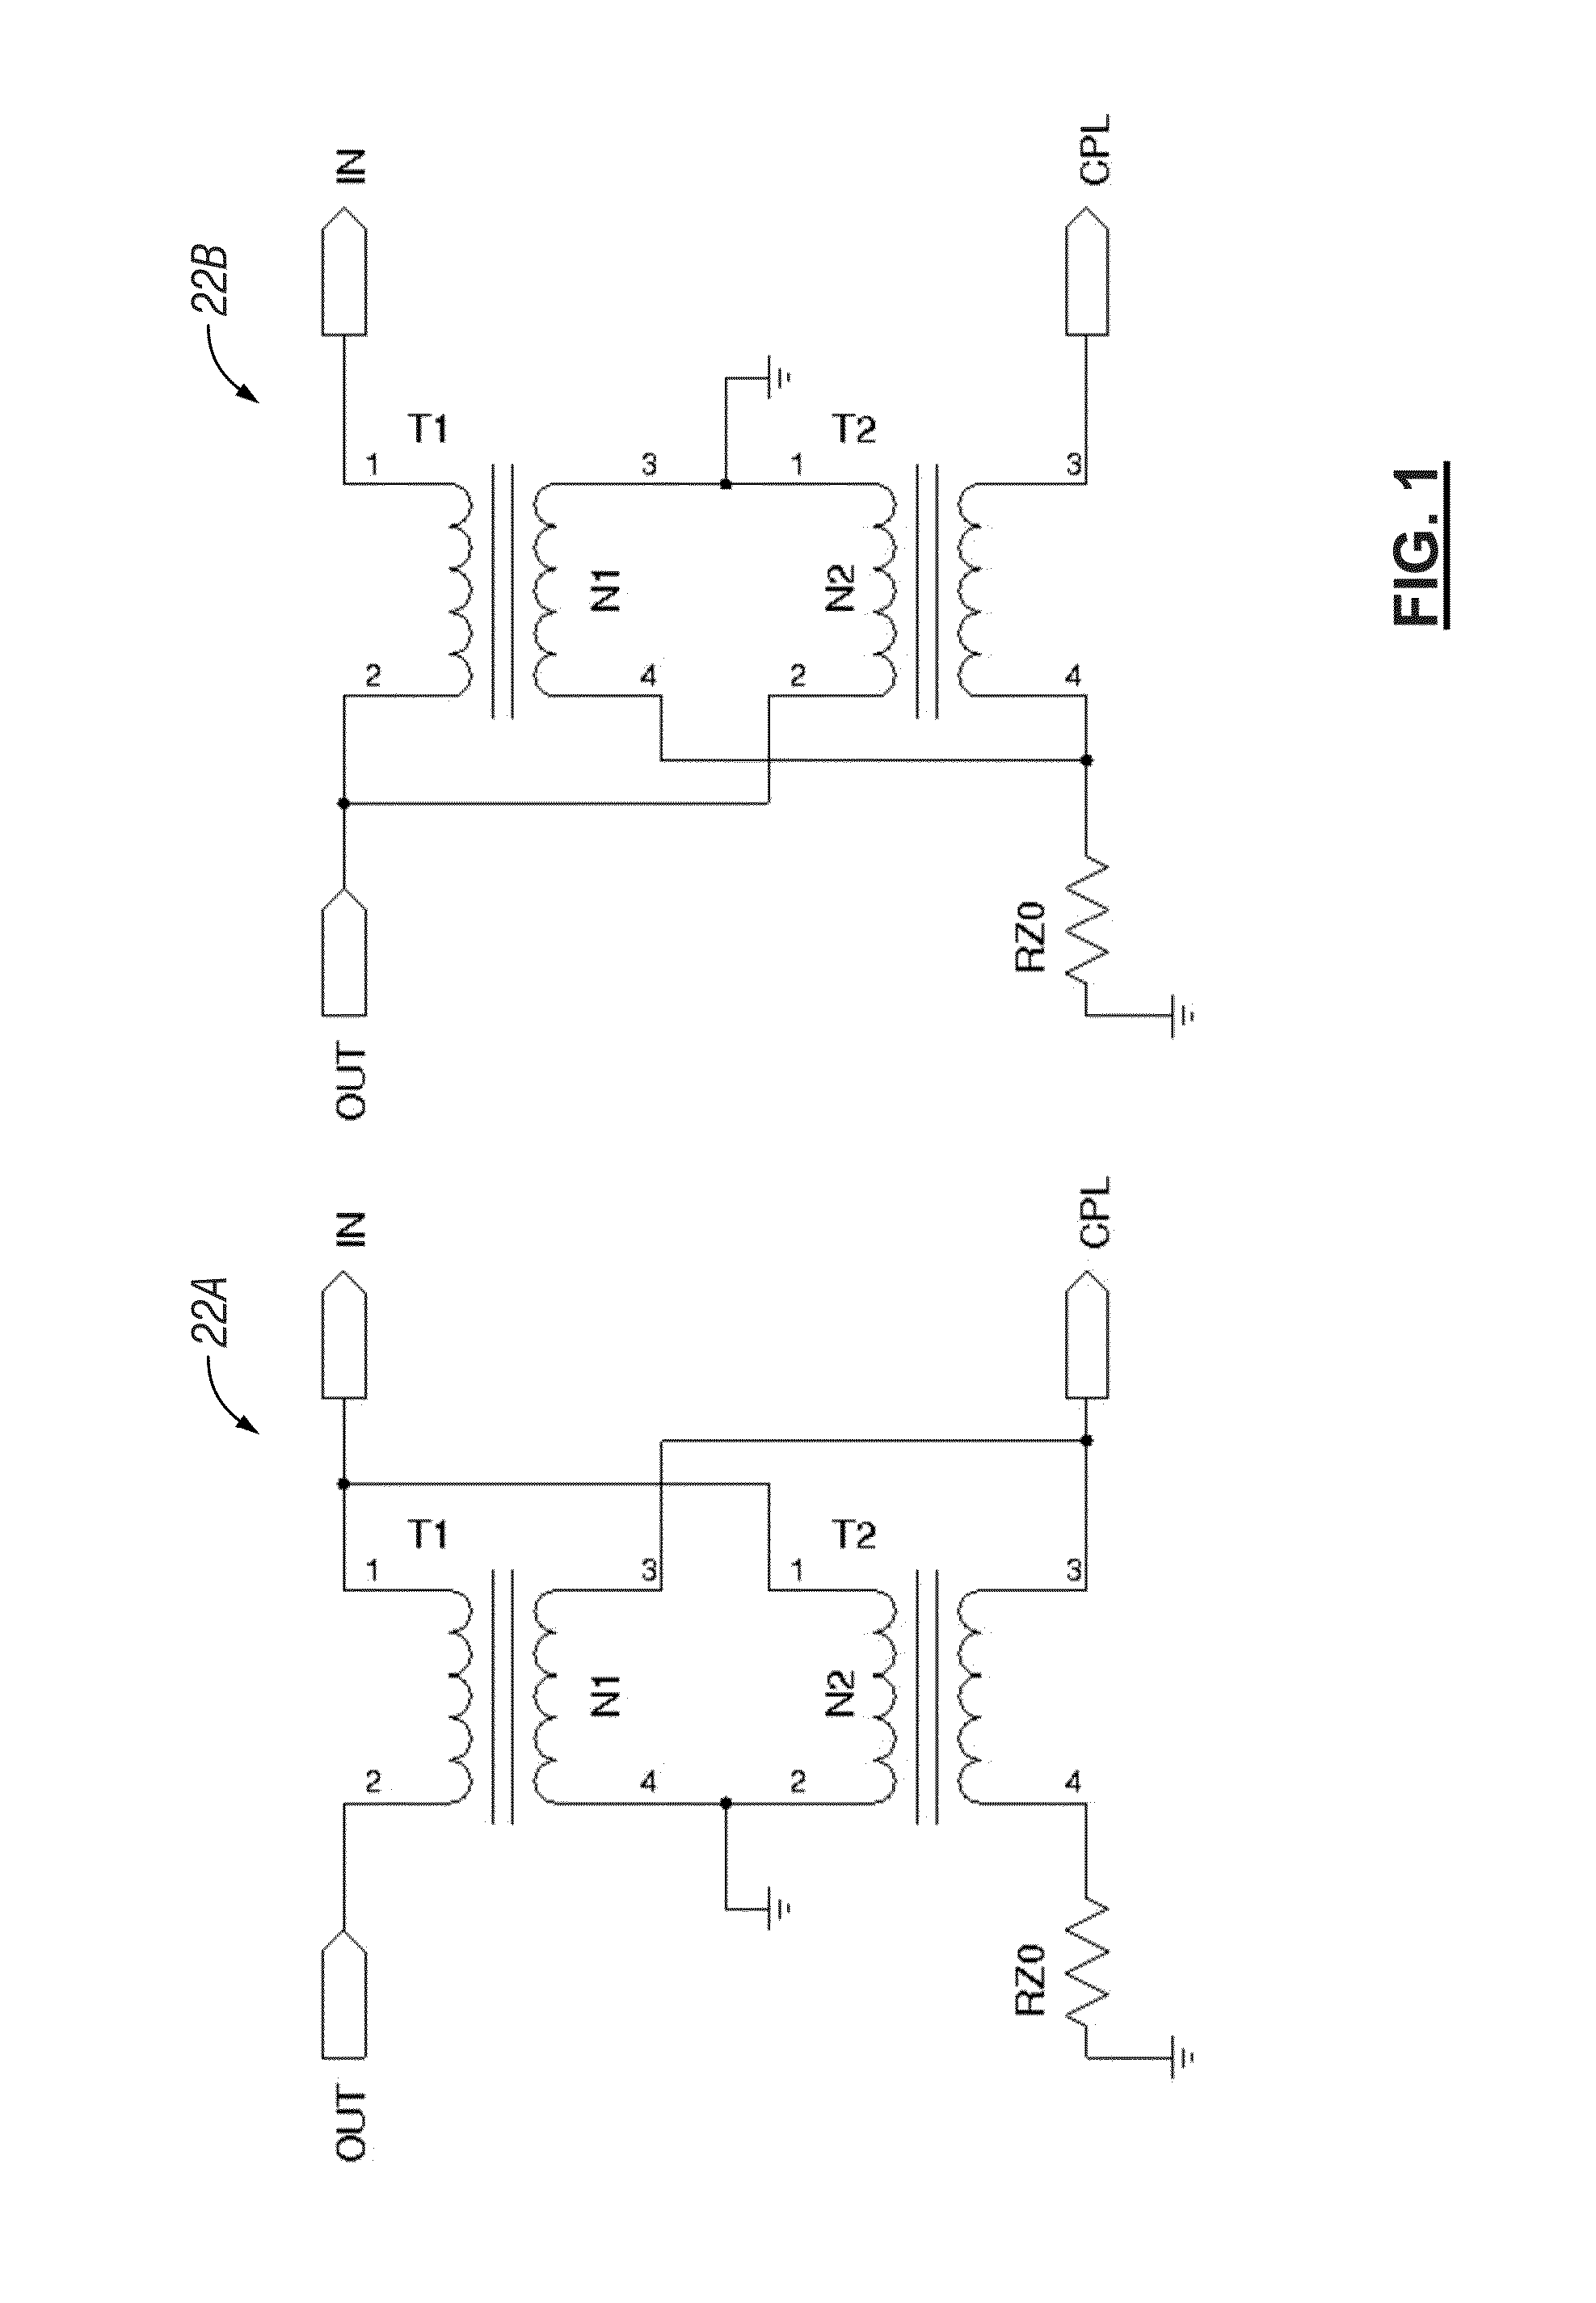 Power line device with directional coupler